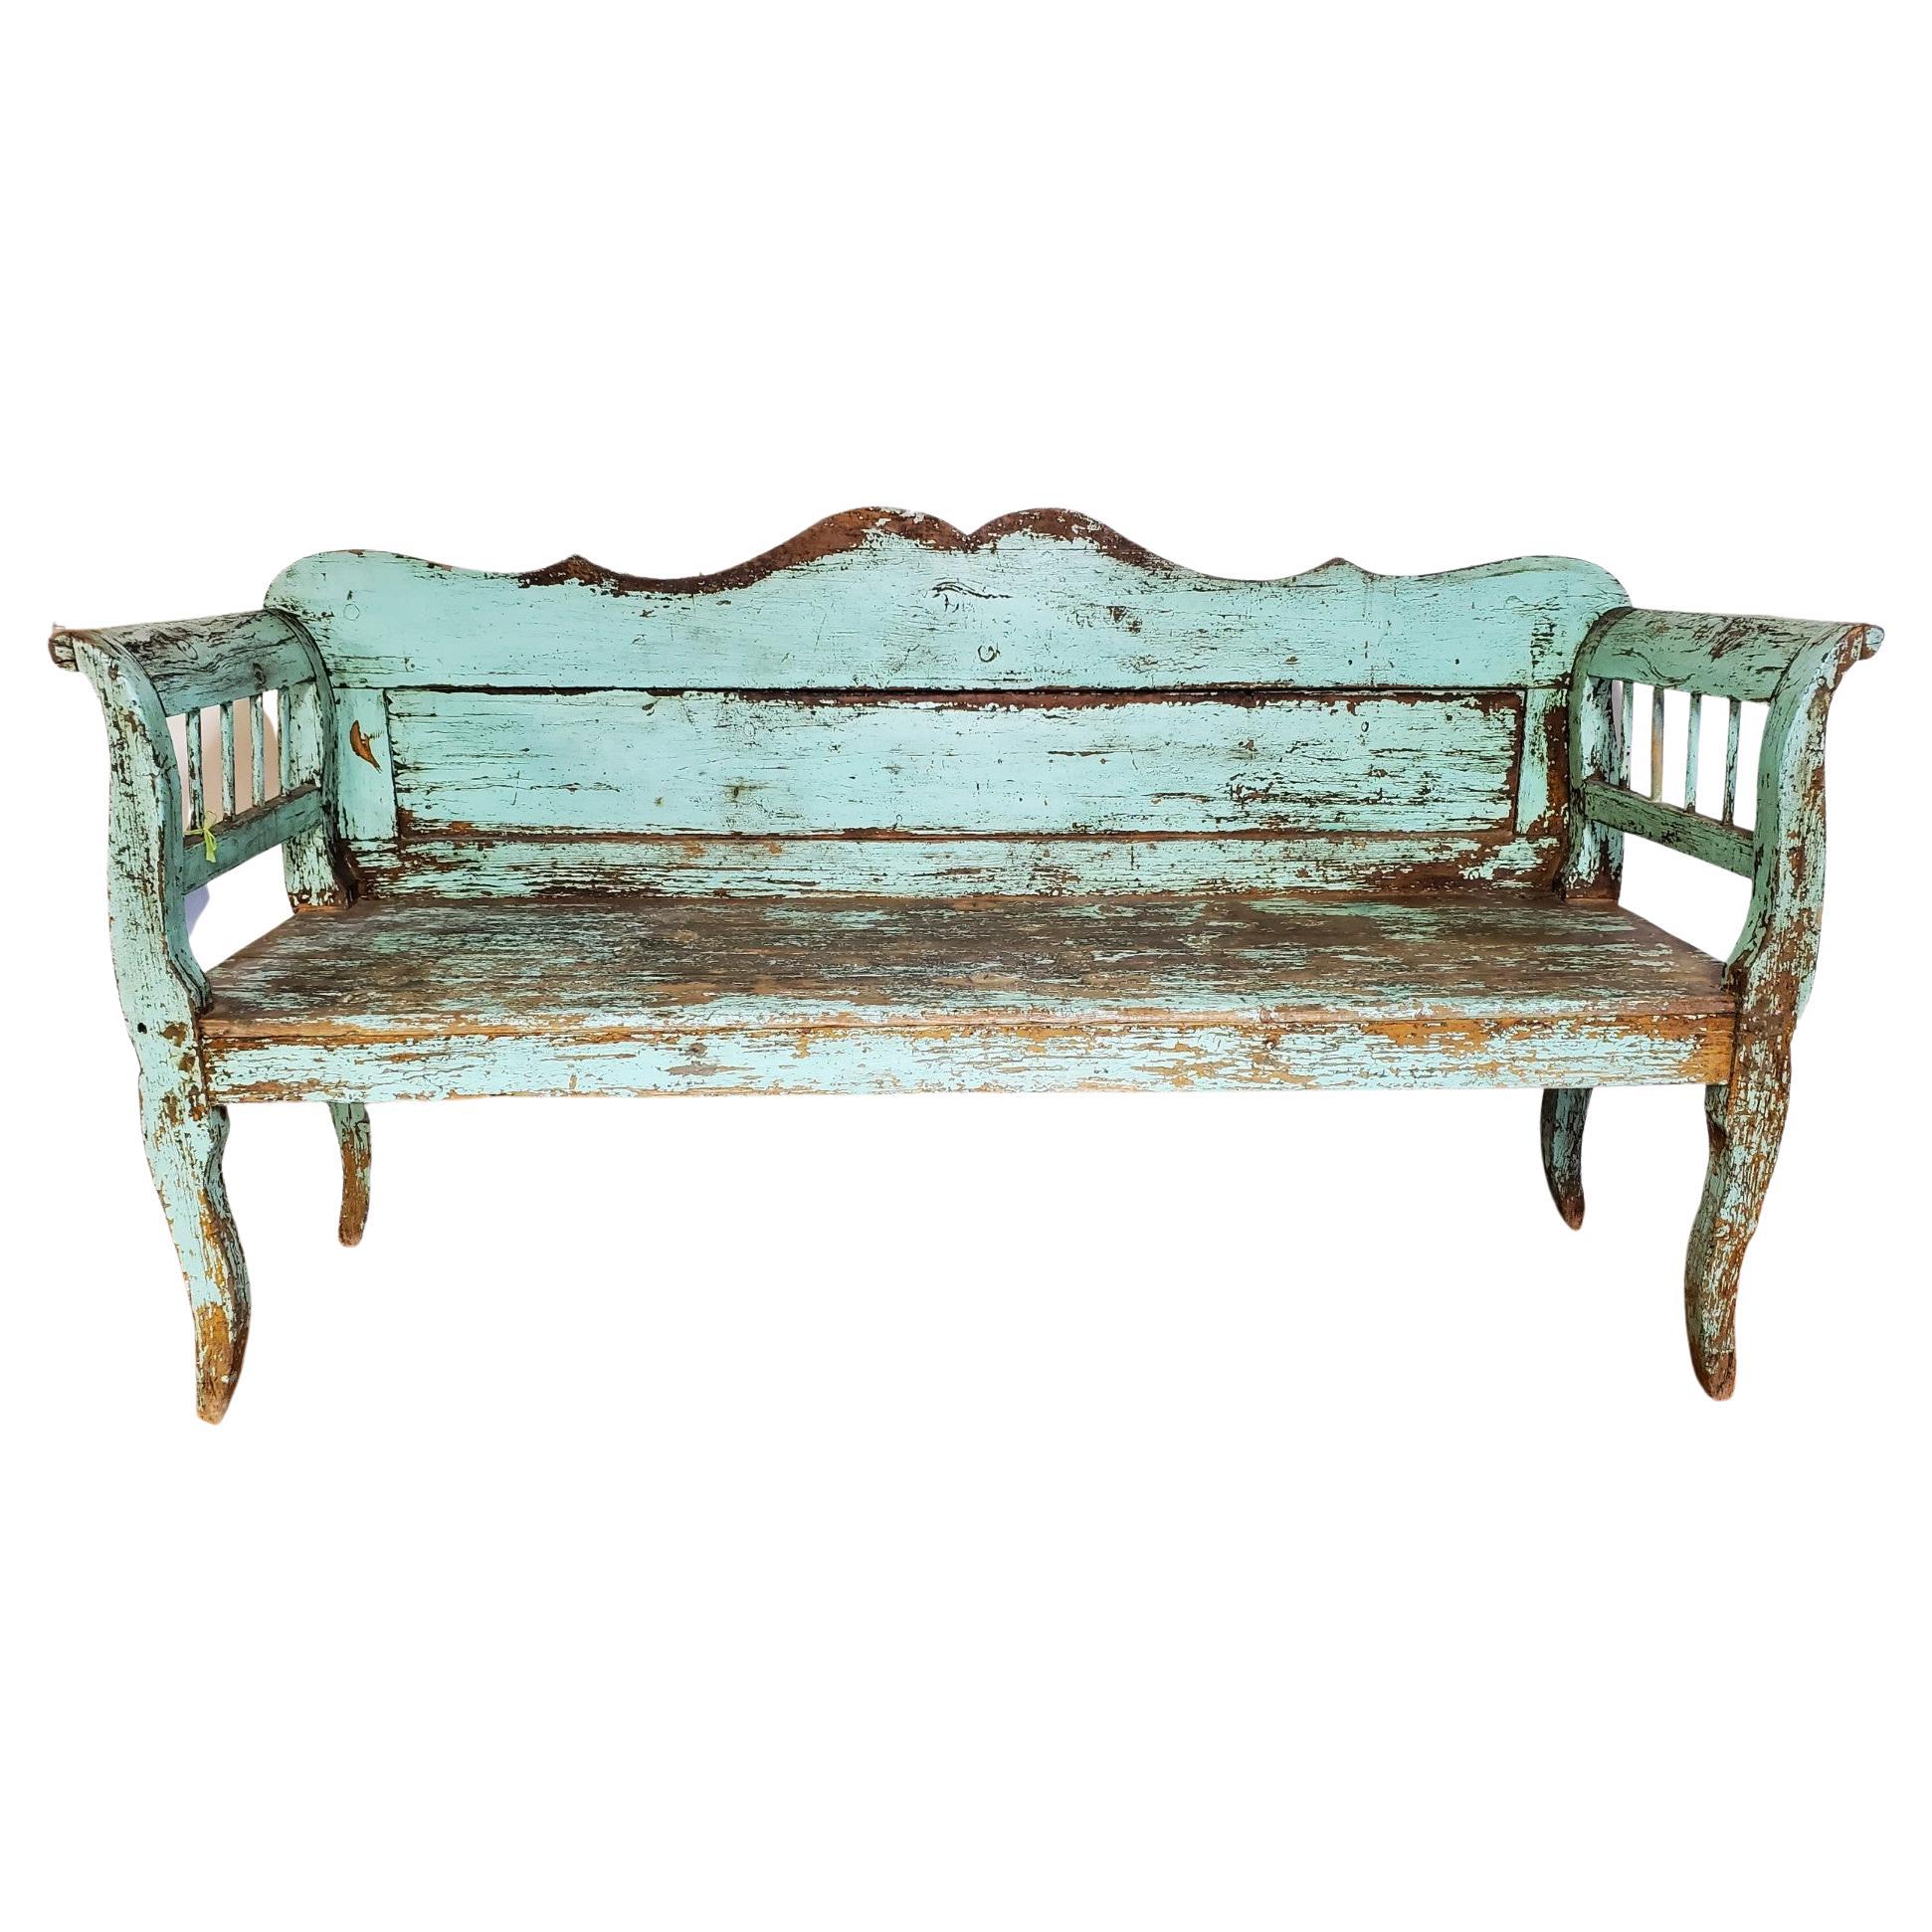 Original Painted French Bench